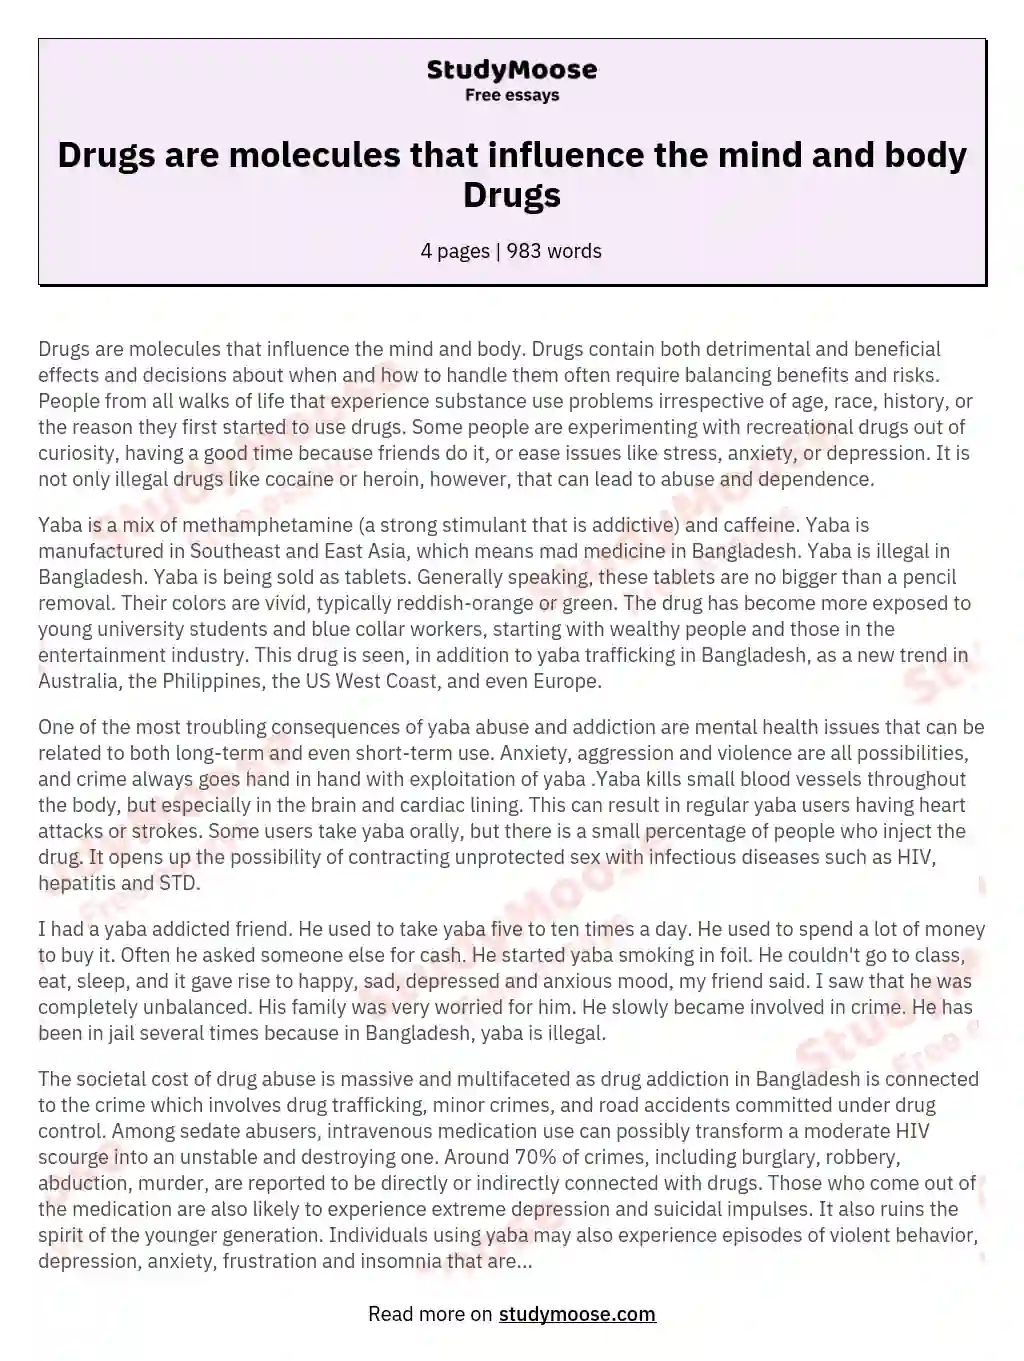 Drugs are molecules that influence the mind and body Drugs essay